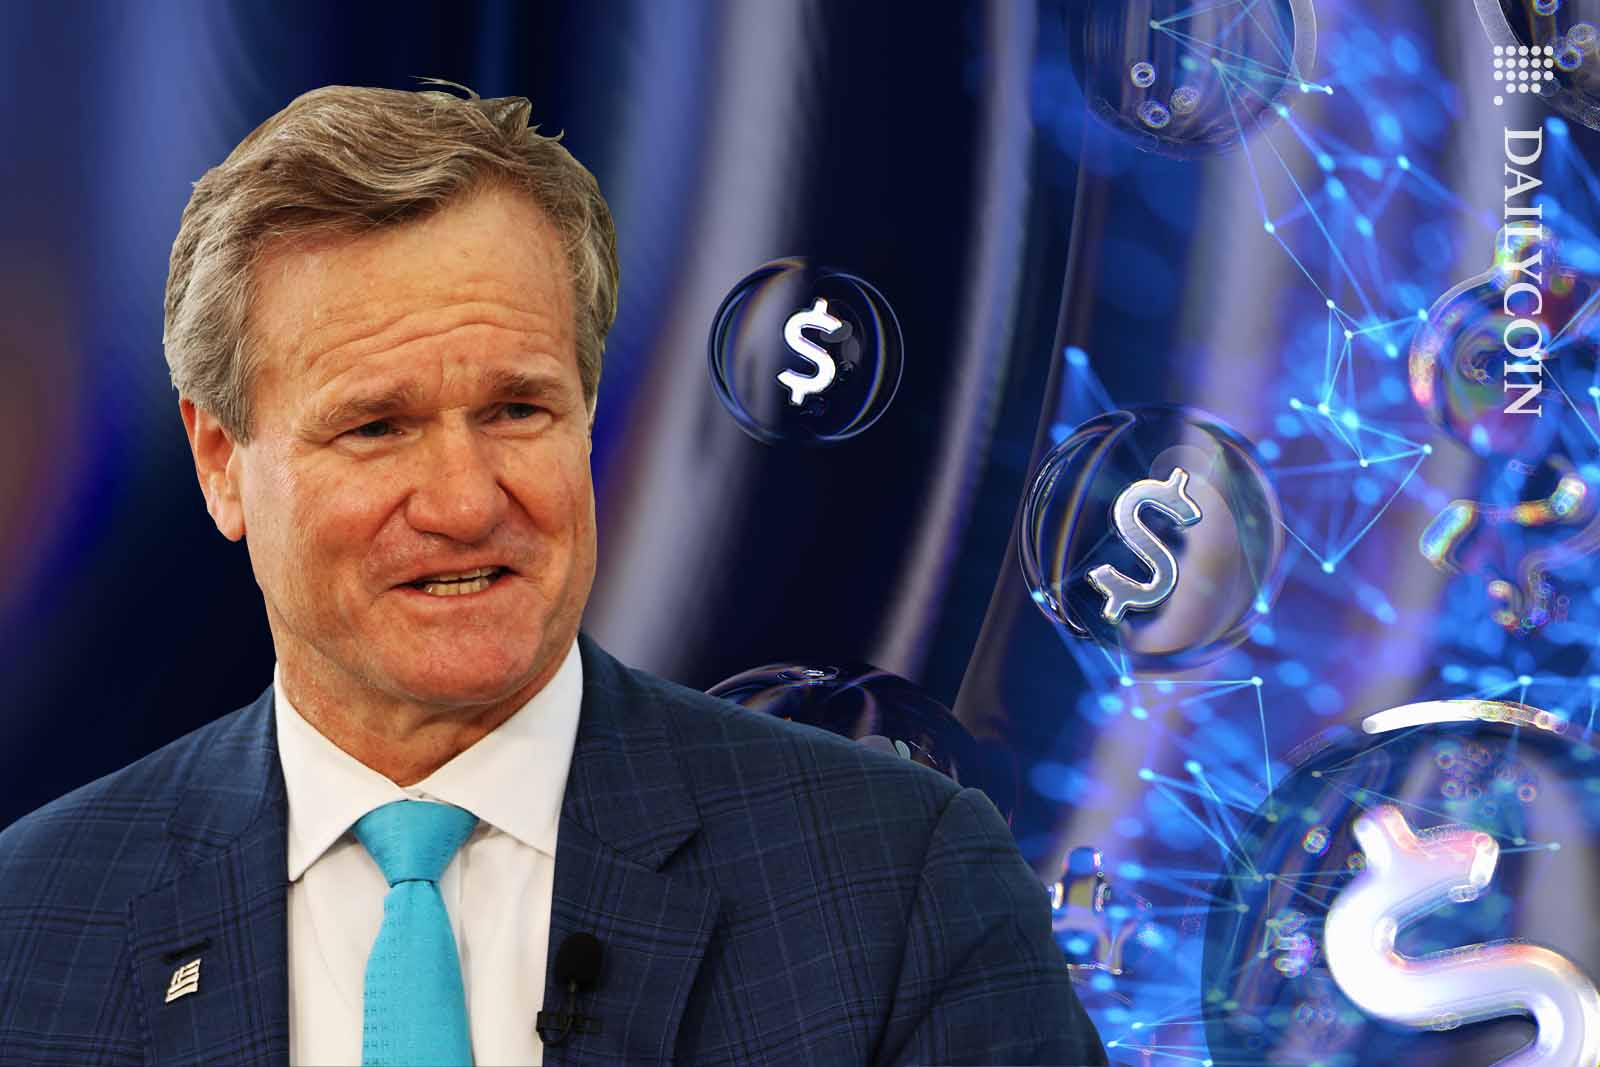 Brian Moynihan looks sceptical infront of some dollar signs in boubles.